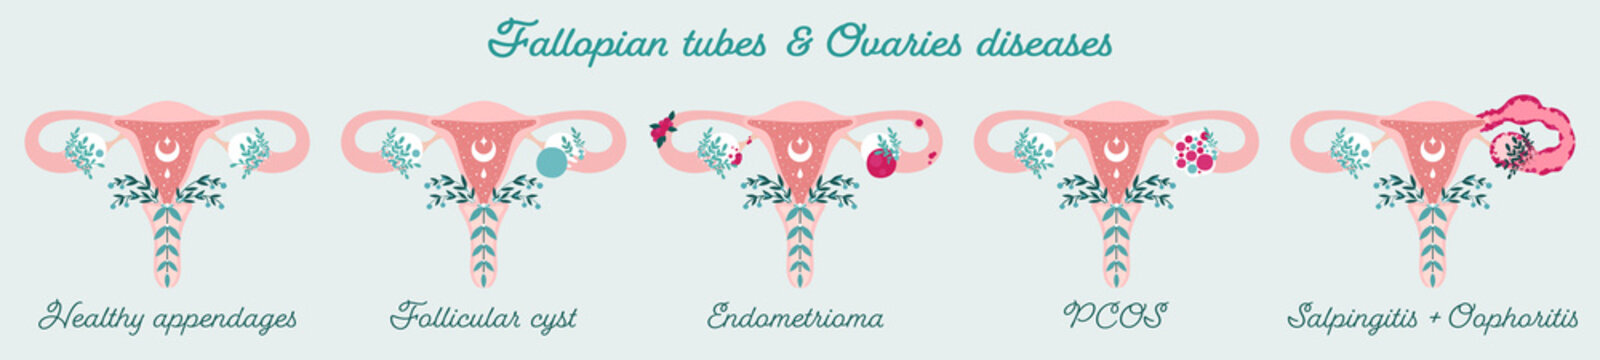 Women health - Fallopian tubes and Ovaries disorders - PCOS, endometrioma e.t.c. Gynecological diseases - Patient-friendly infographic. Uterus in flowers diagram - Isolated anatomical schemes